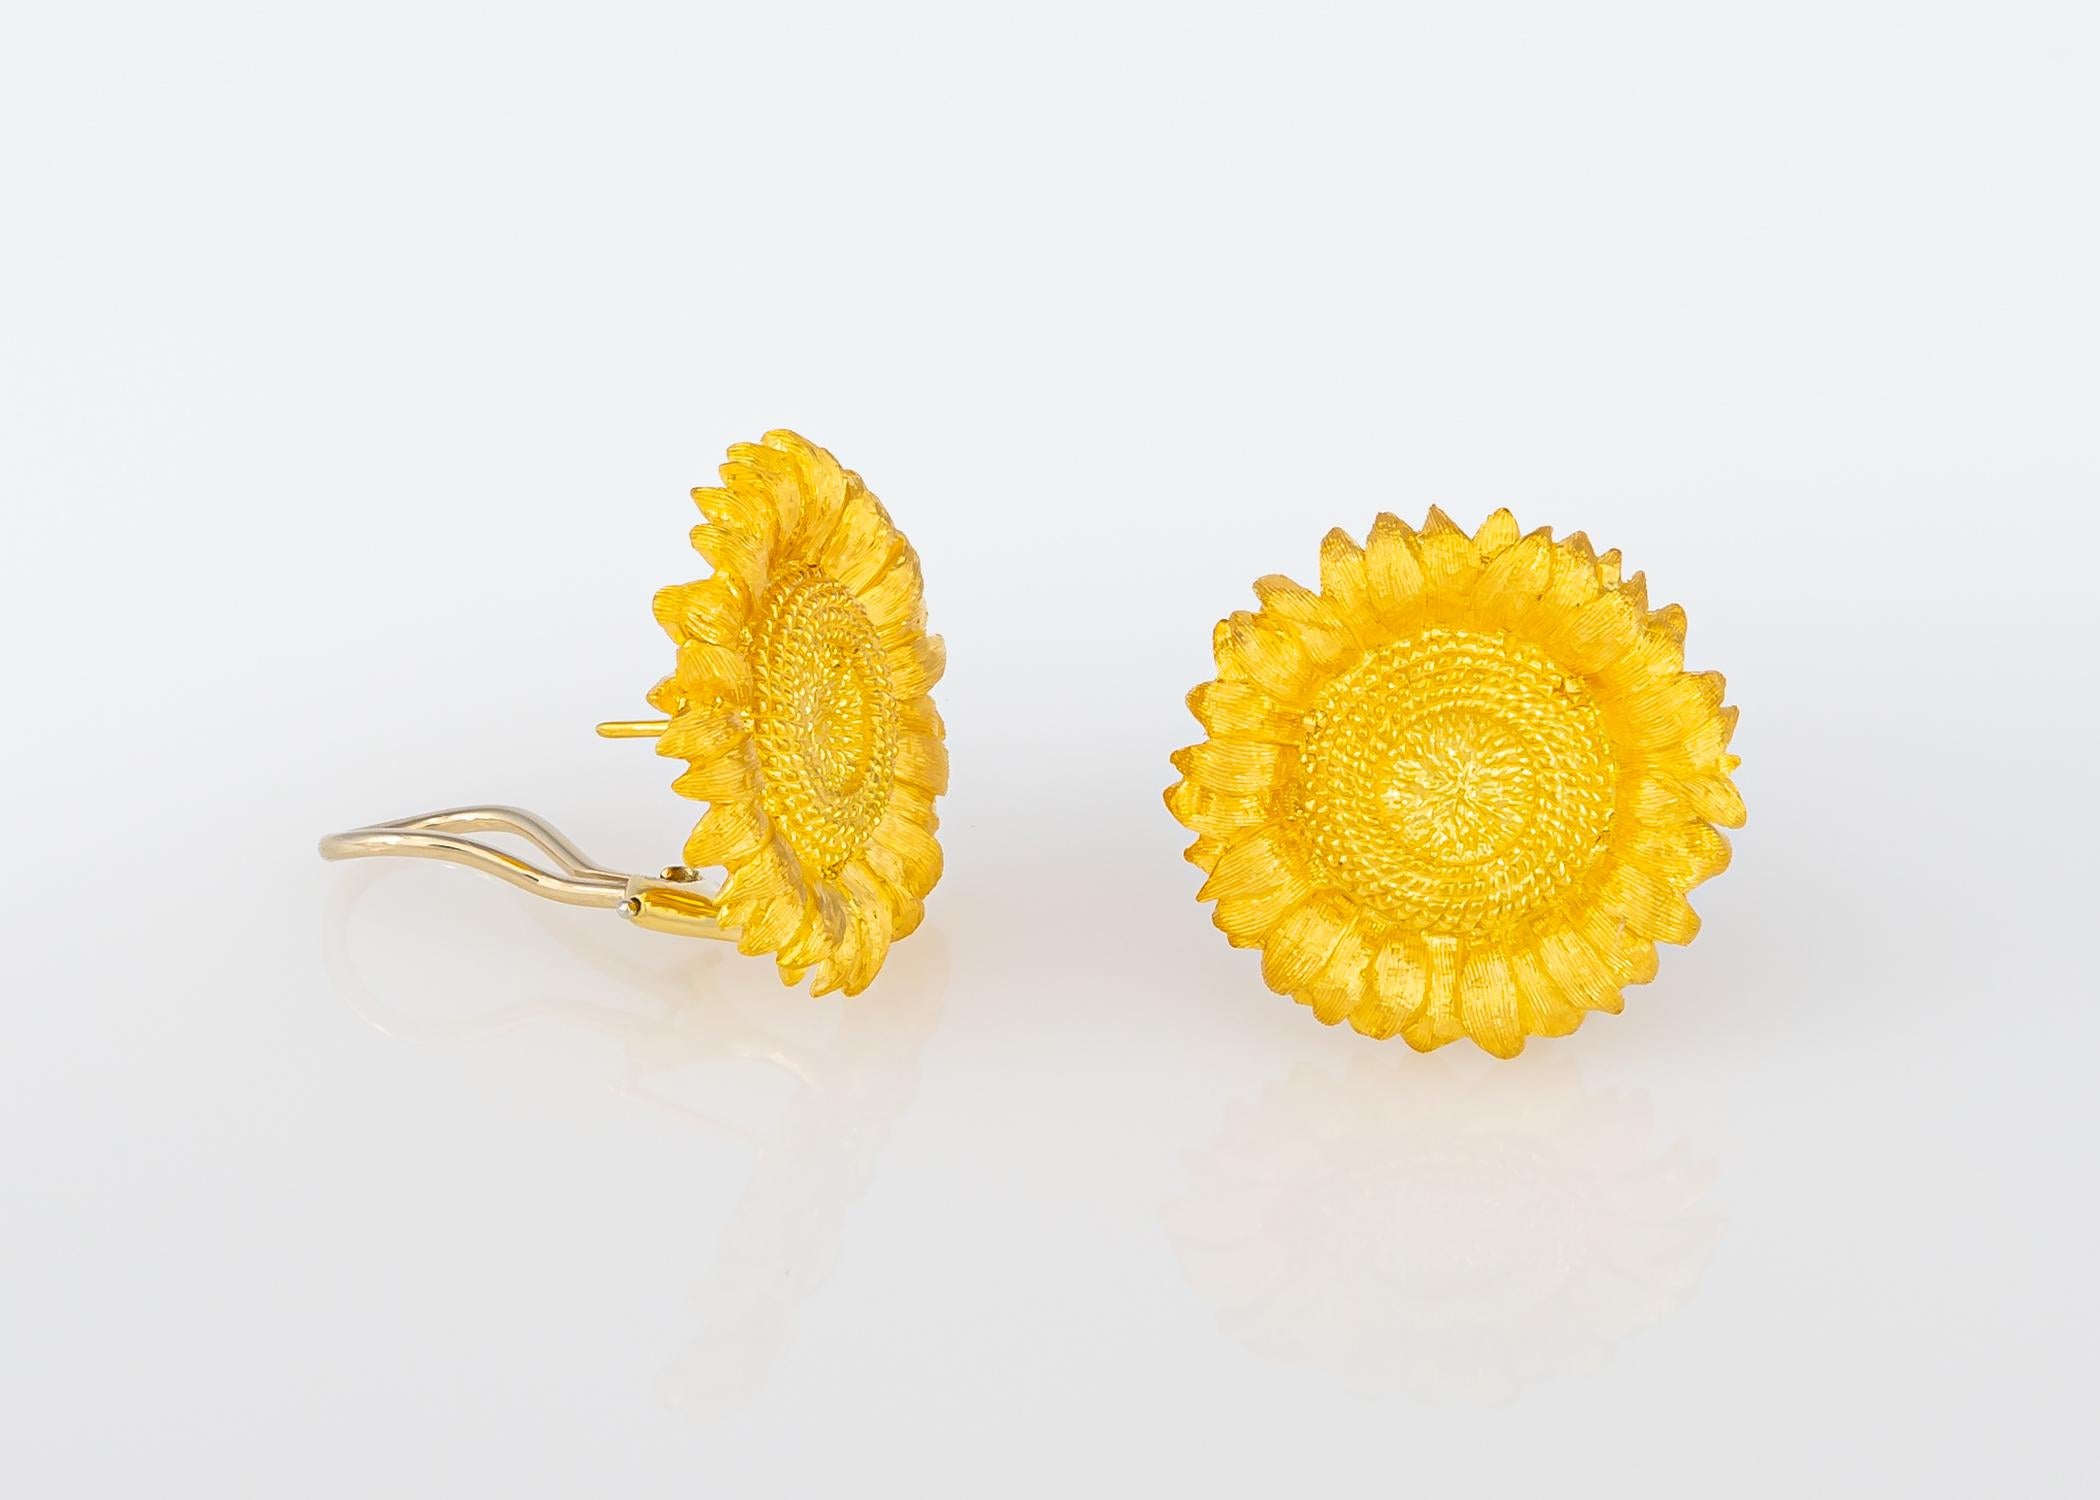 Robert Bruce Bielka's sunflower motif earrings are a classic. The detailing and hand applied finish are exceptional. At just over 1 inch these are your new go to wearable gold earrings.